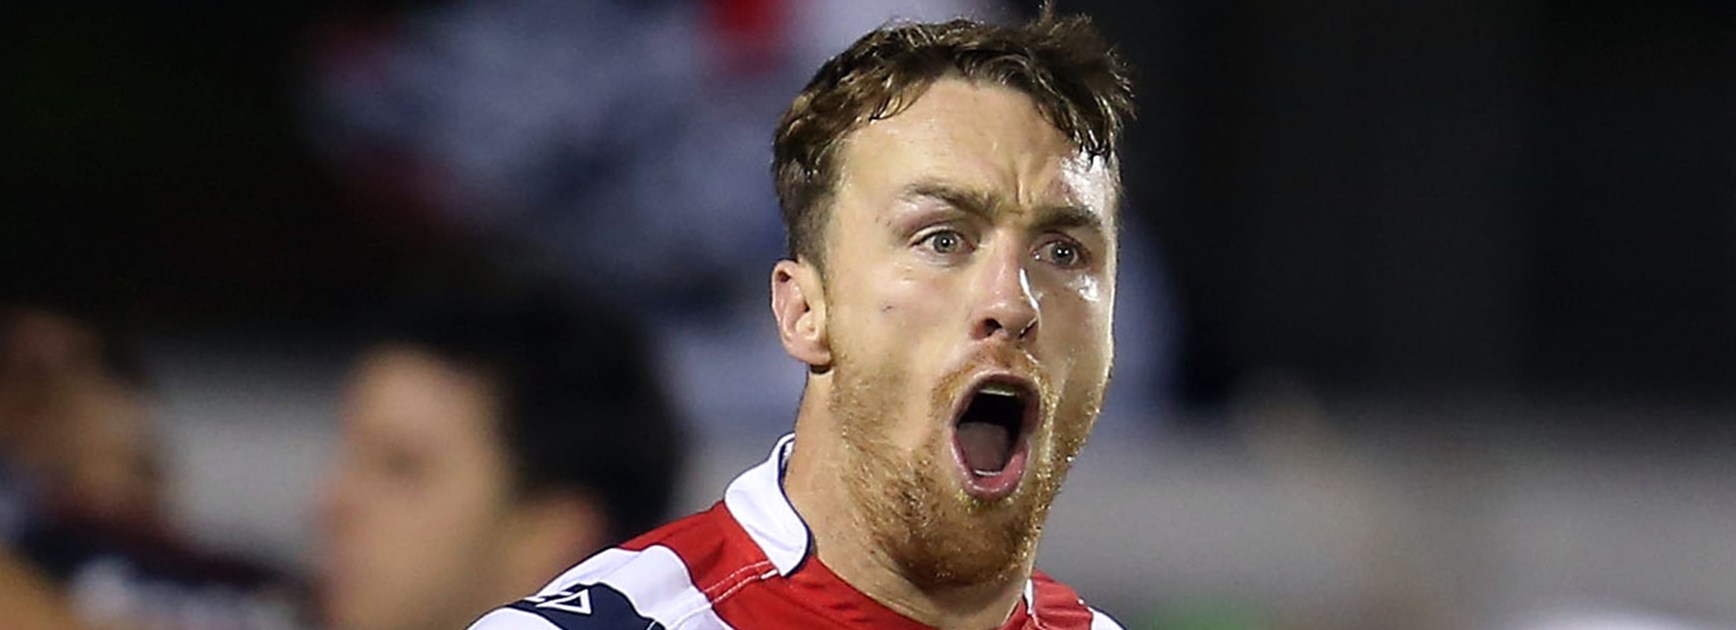 Roosters five-eighth James Maloney provided the spark in his side's late win over the Warriors.